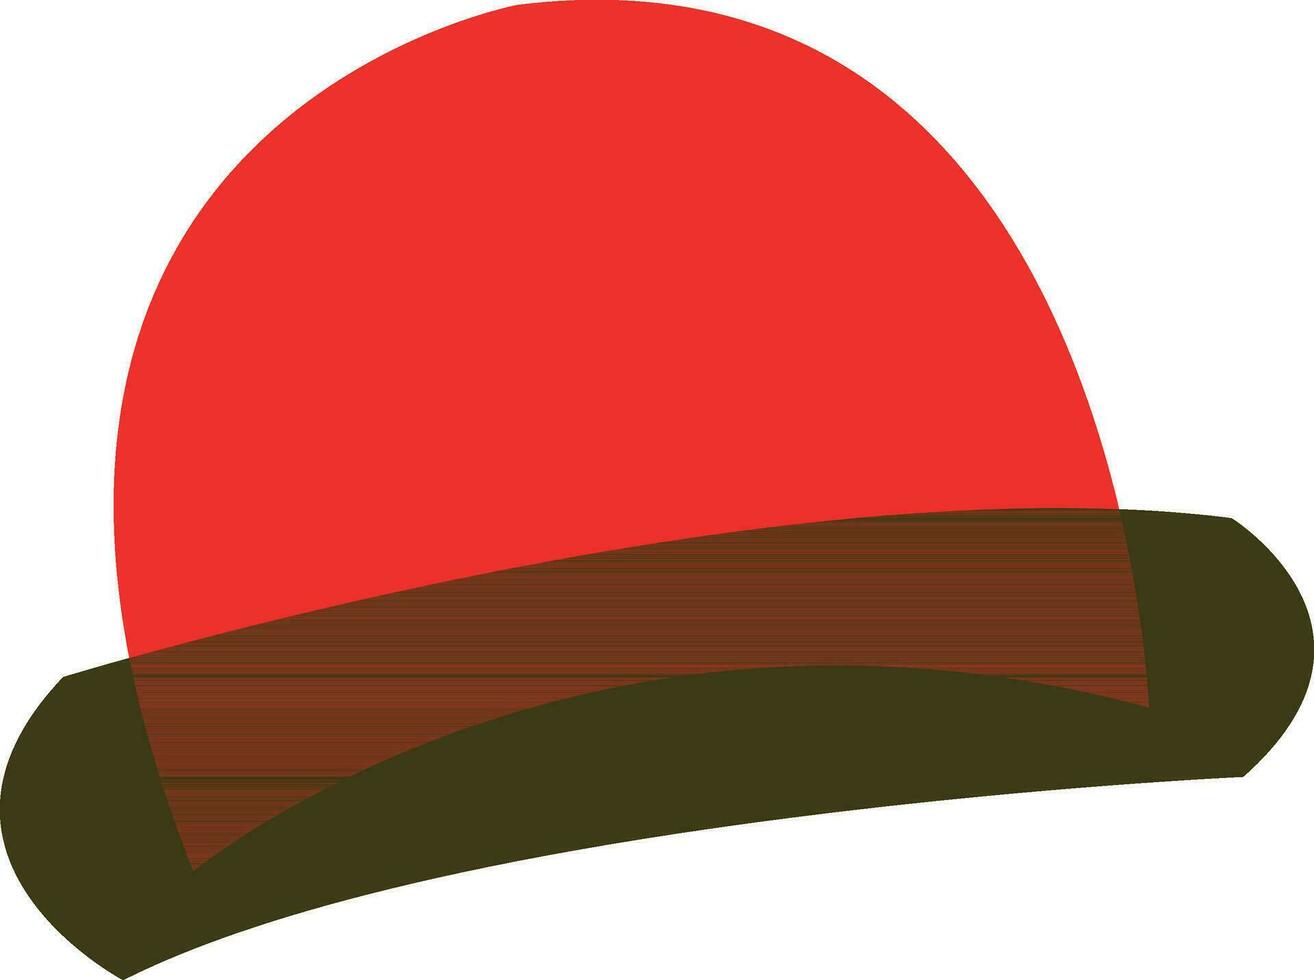 Red and green bowler hat isolated. vector